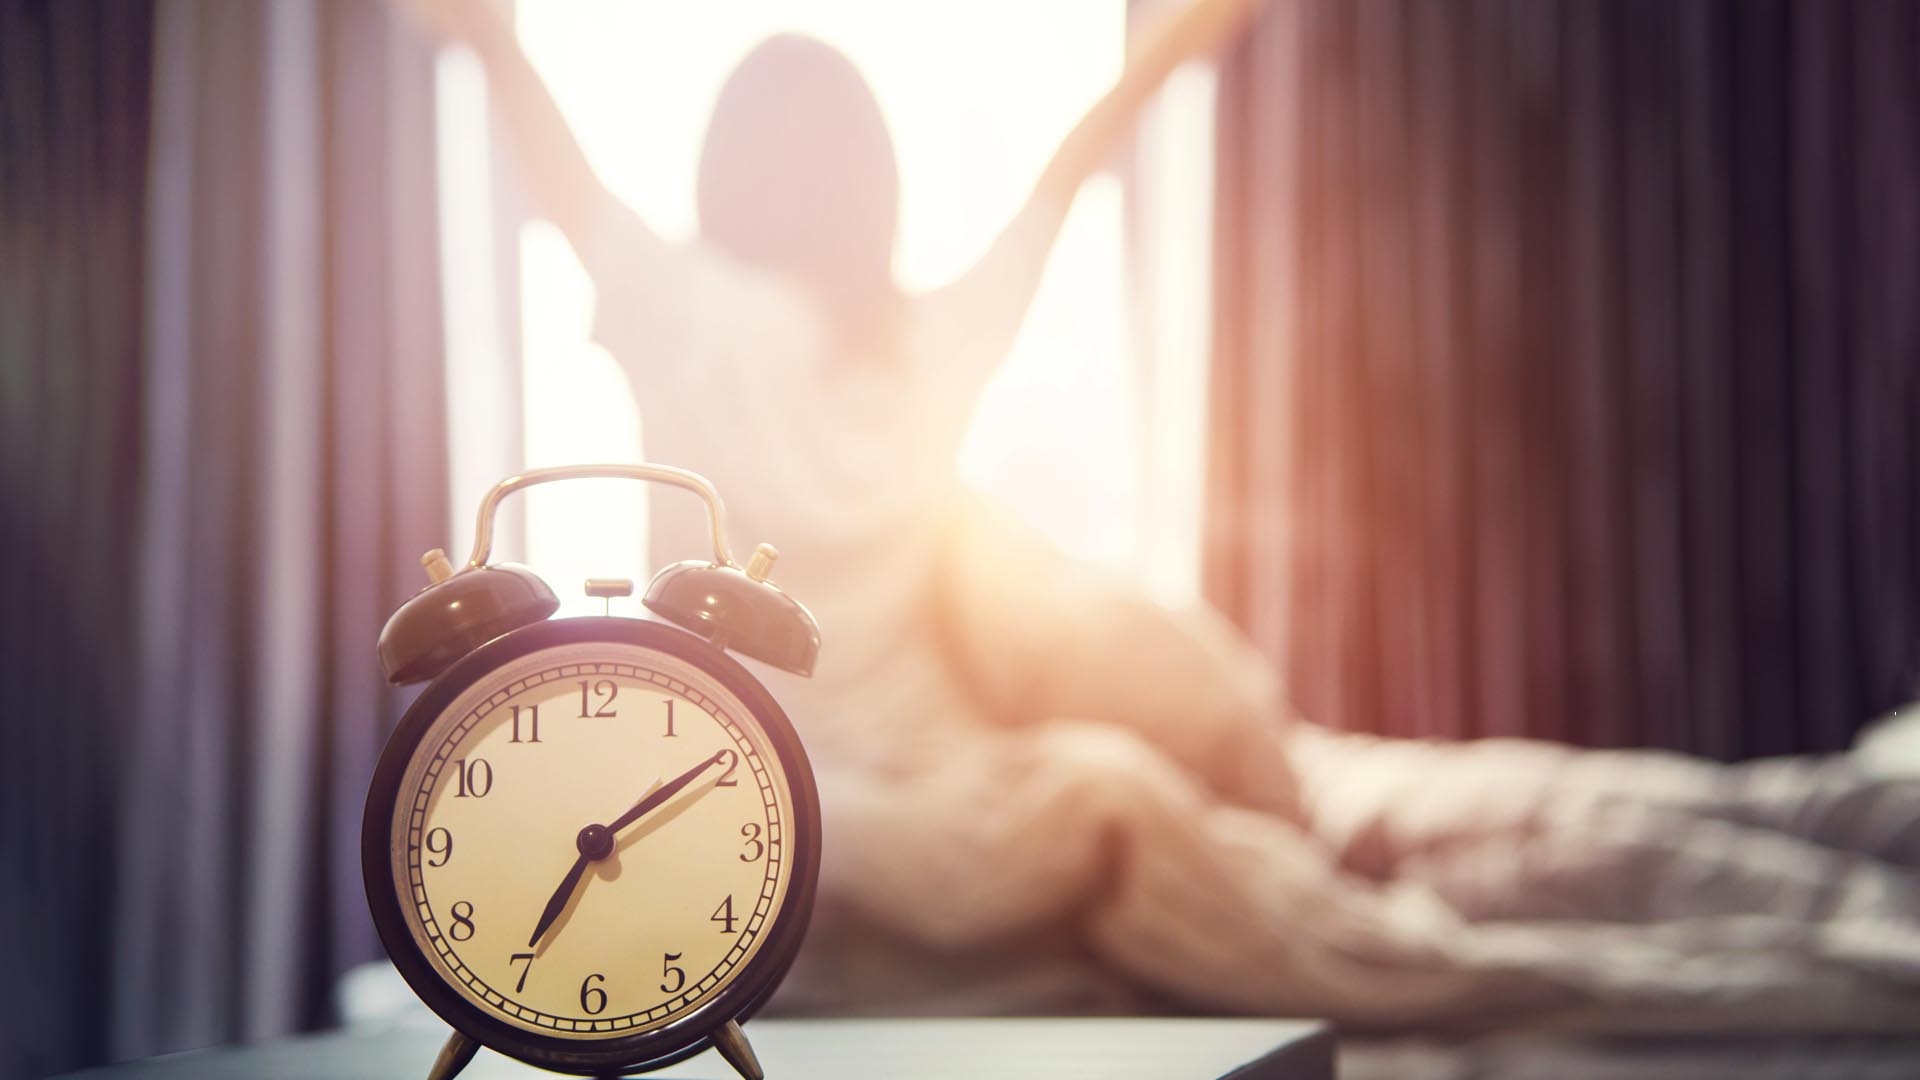 Top 10 Tips for a Healthy Morning Routine